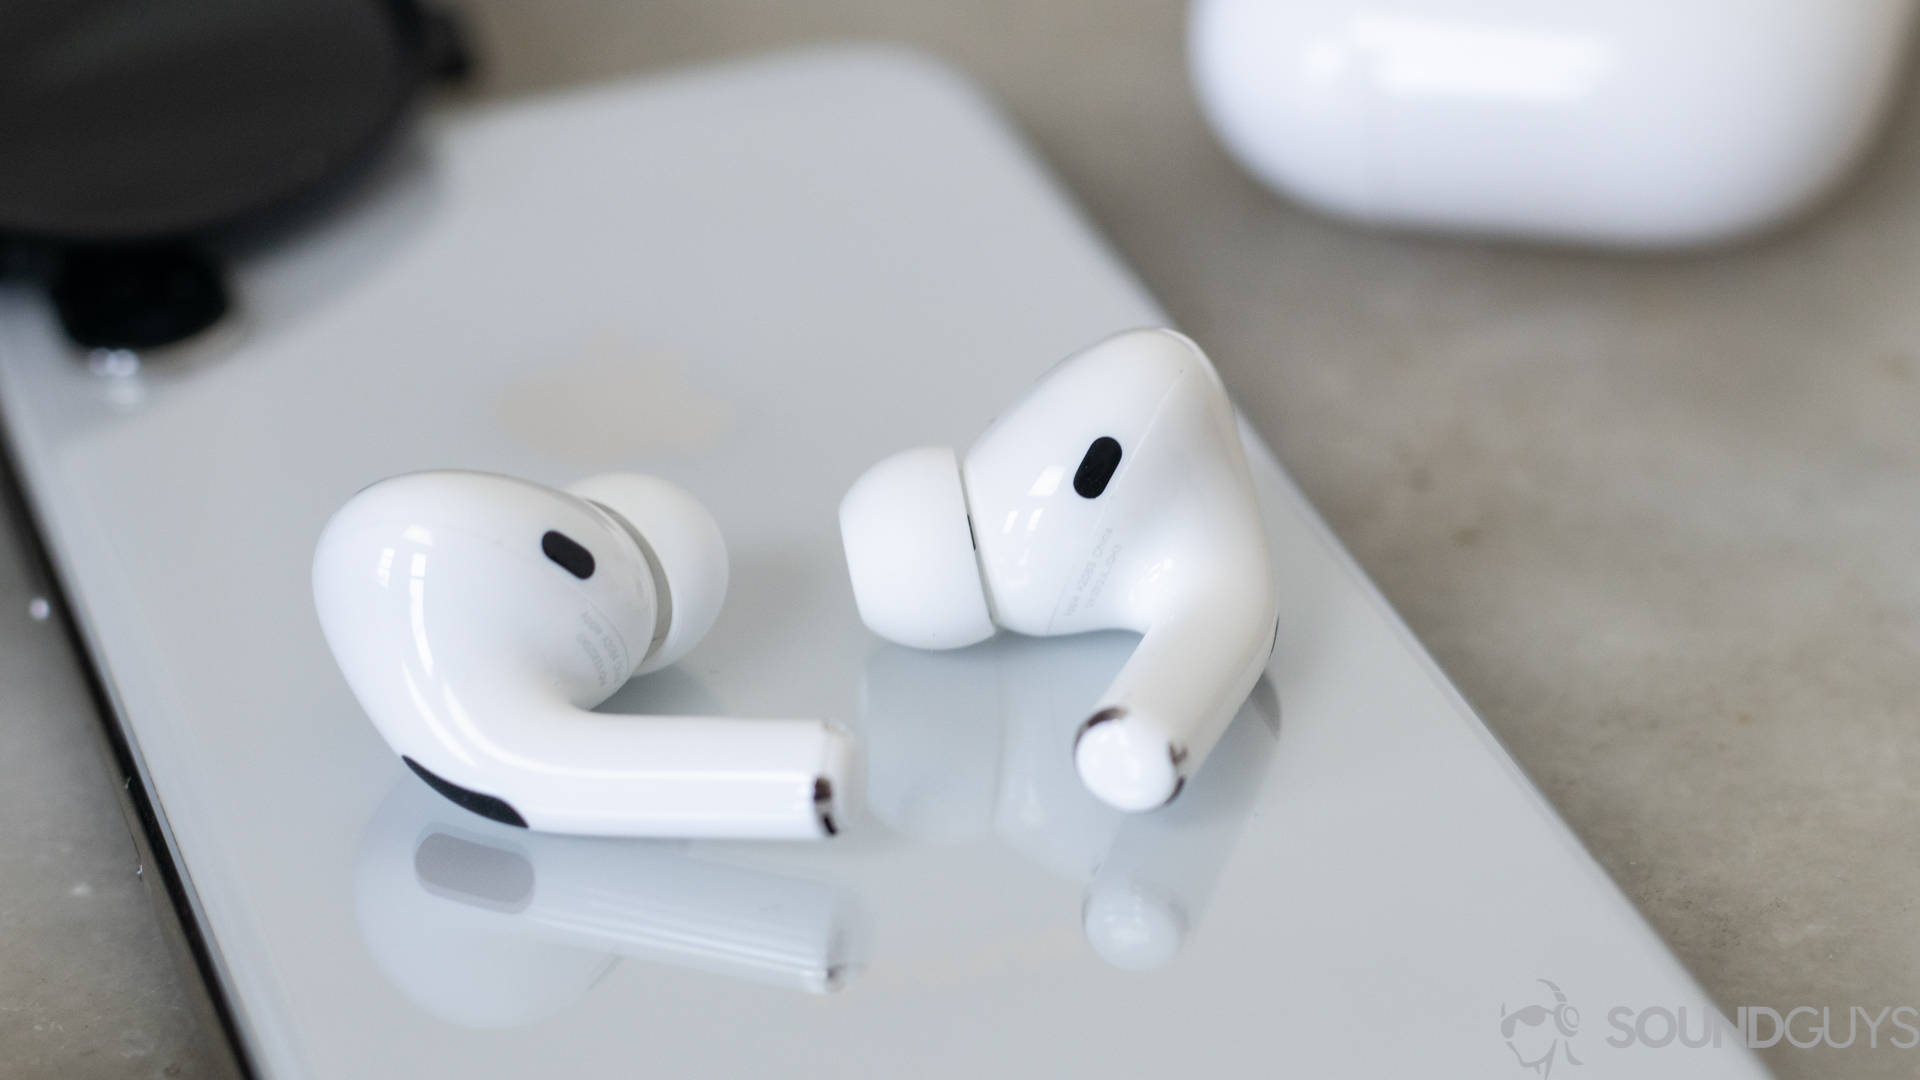 Apple AirPods Pro (1st generation) review: Finally good - SoundGuys